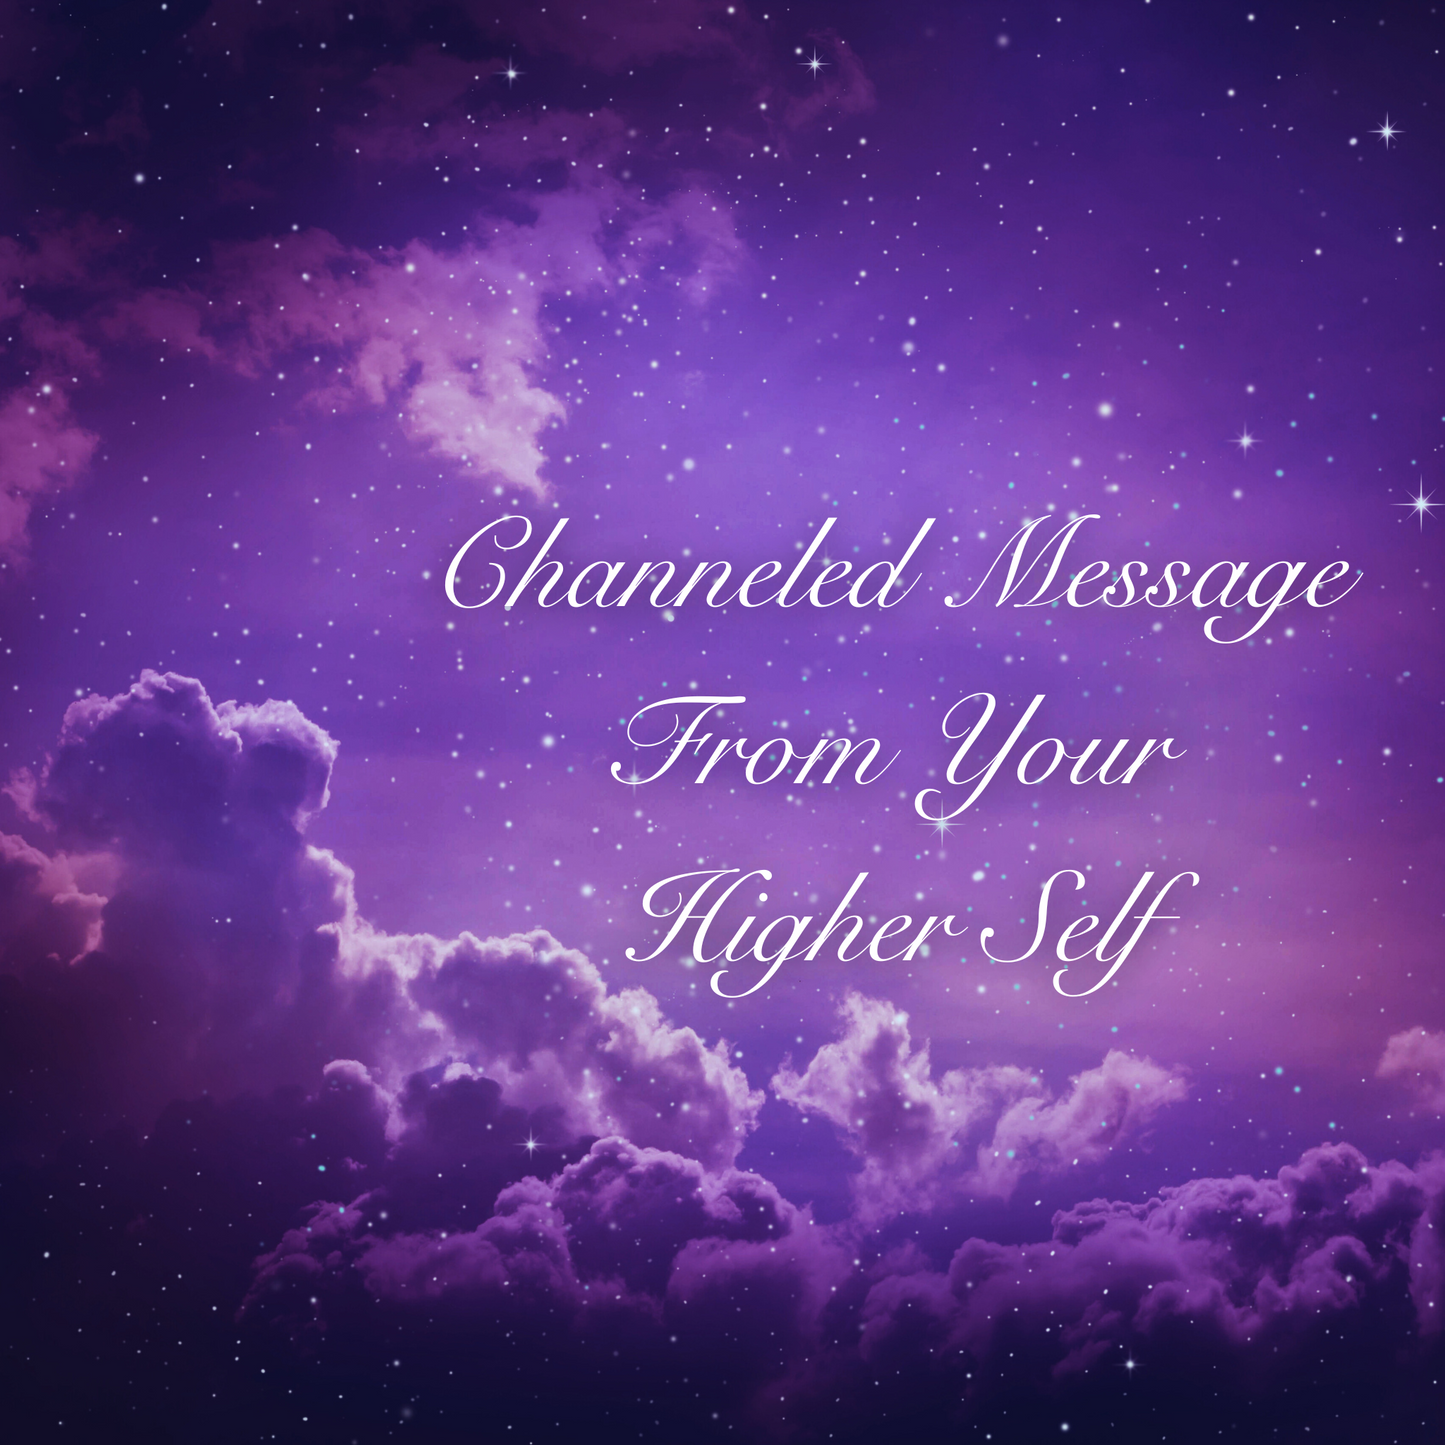 Channeled Message From Your Higher Self